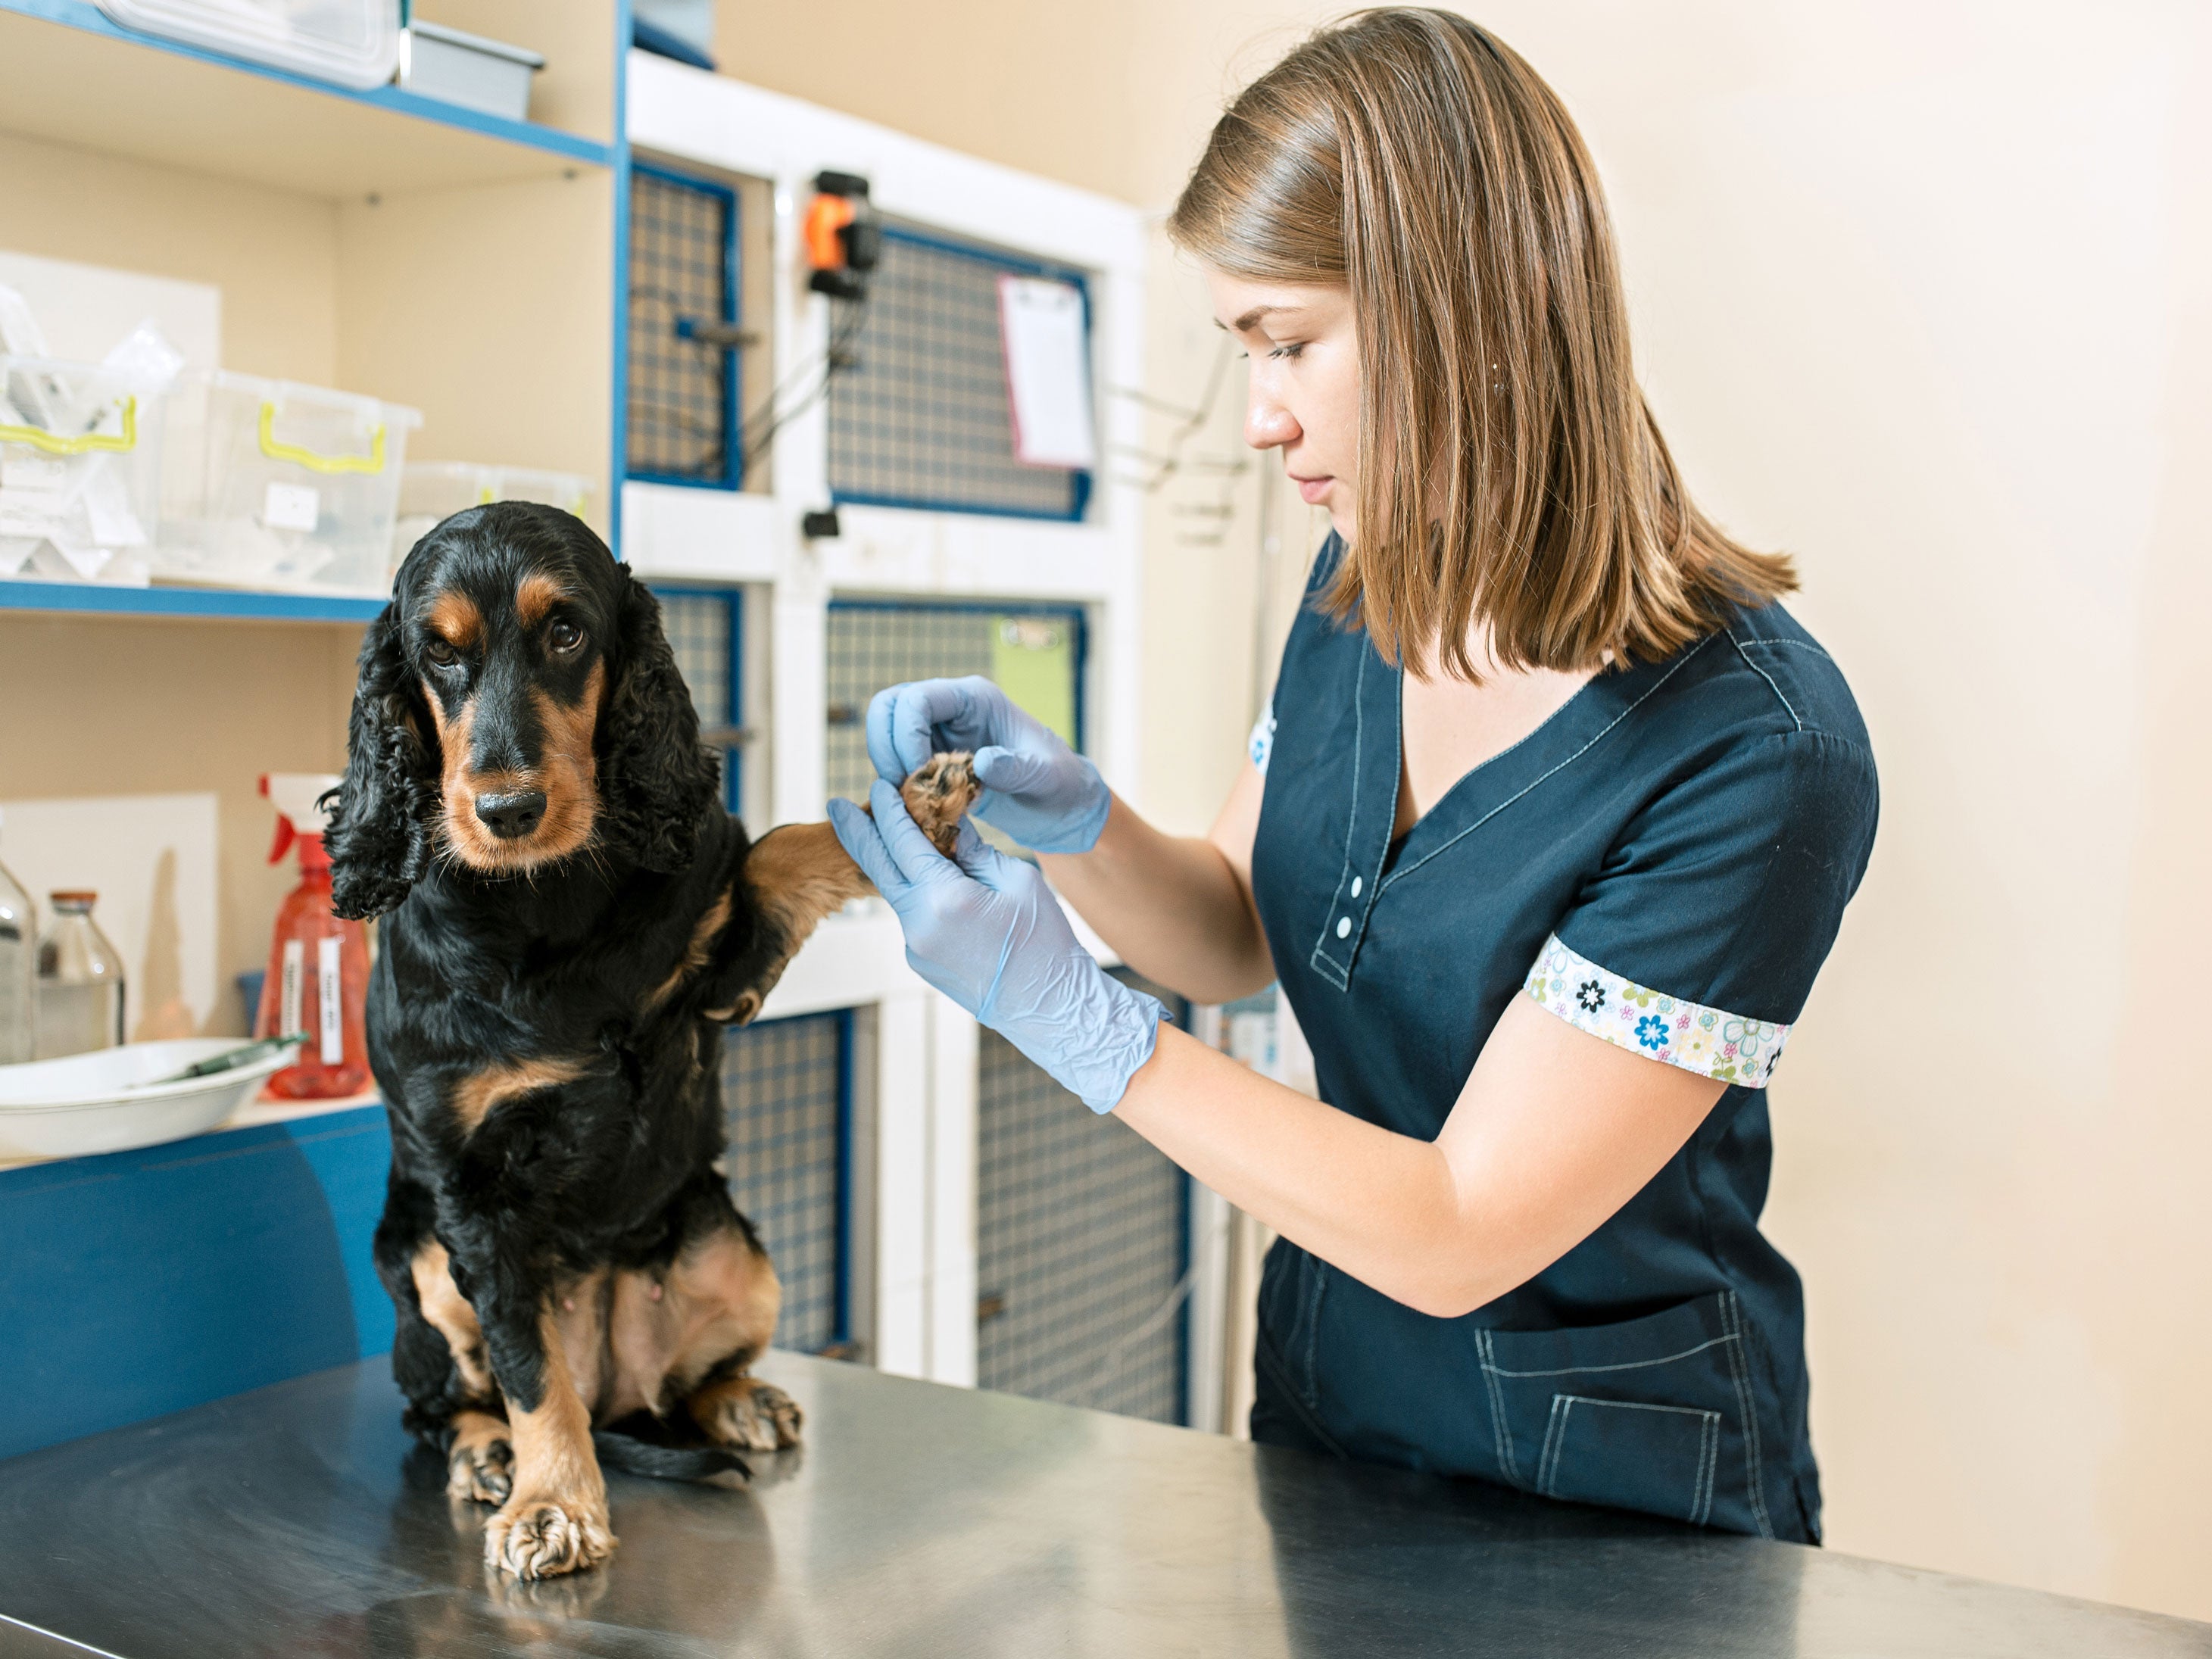 Veterinary nurse receives compensation after work-related injury